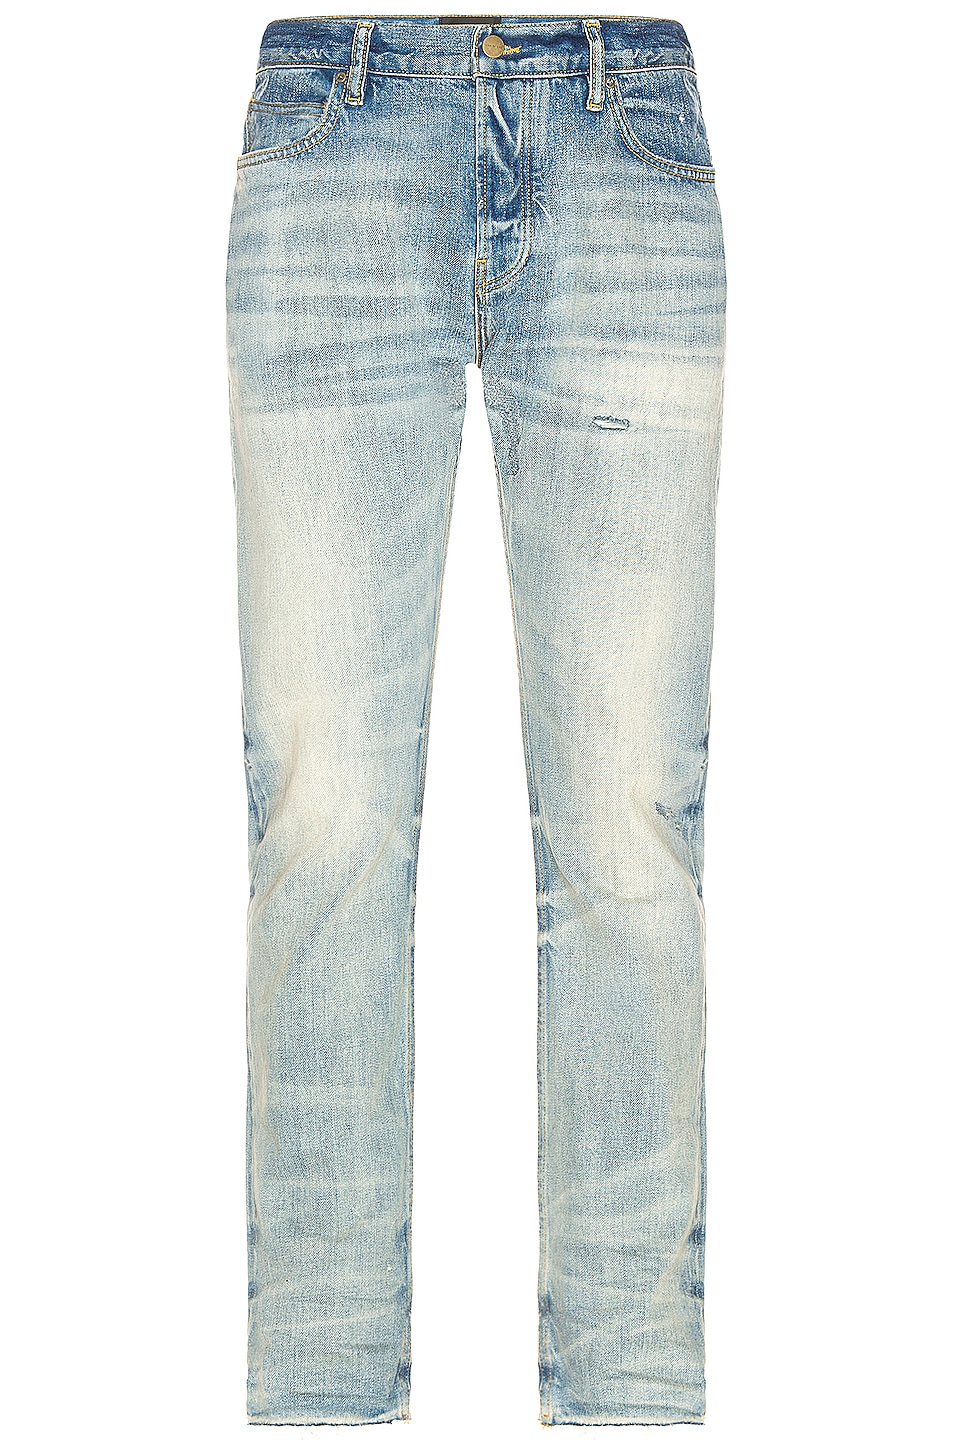 Image 1 of Fear of God 7th Collection Denim in 5 Year Indigo Vintage Wash